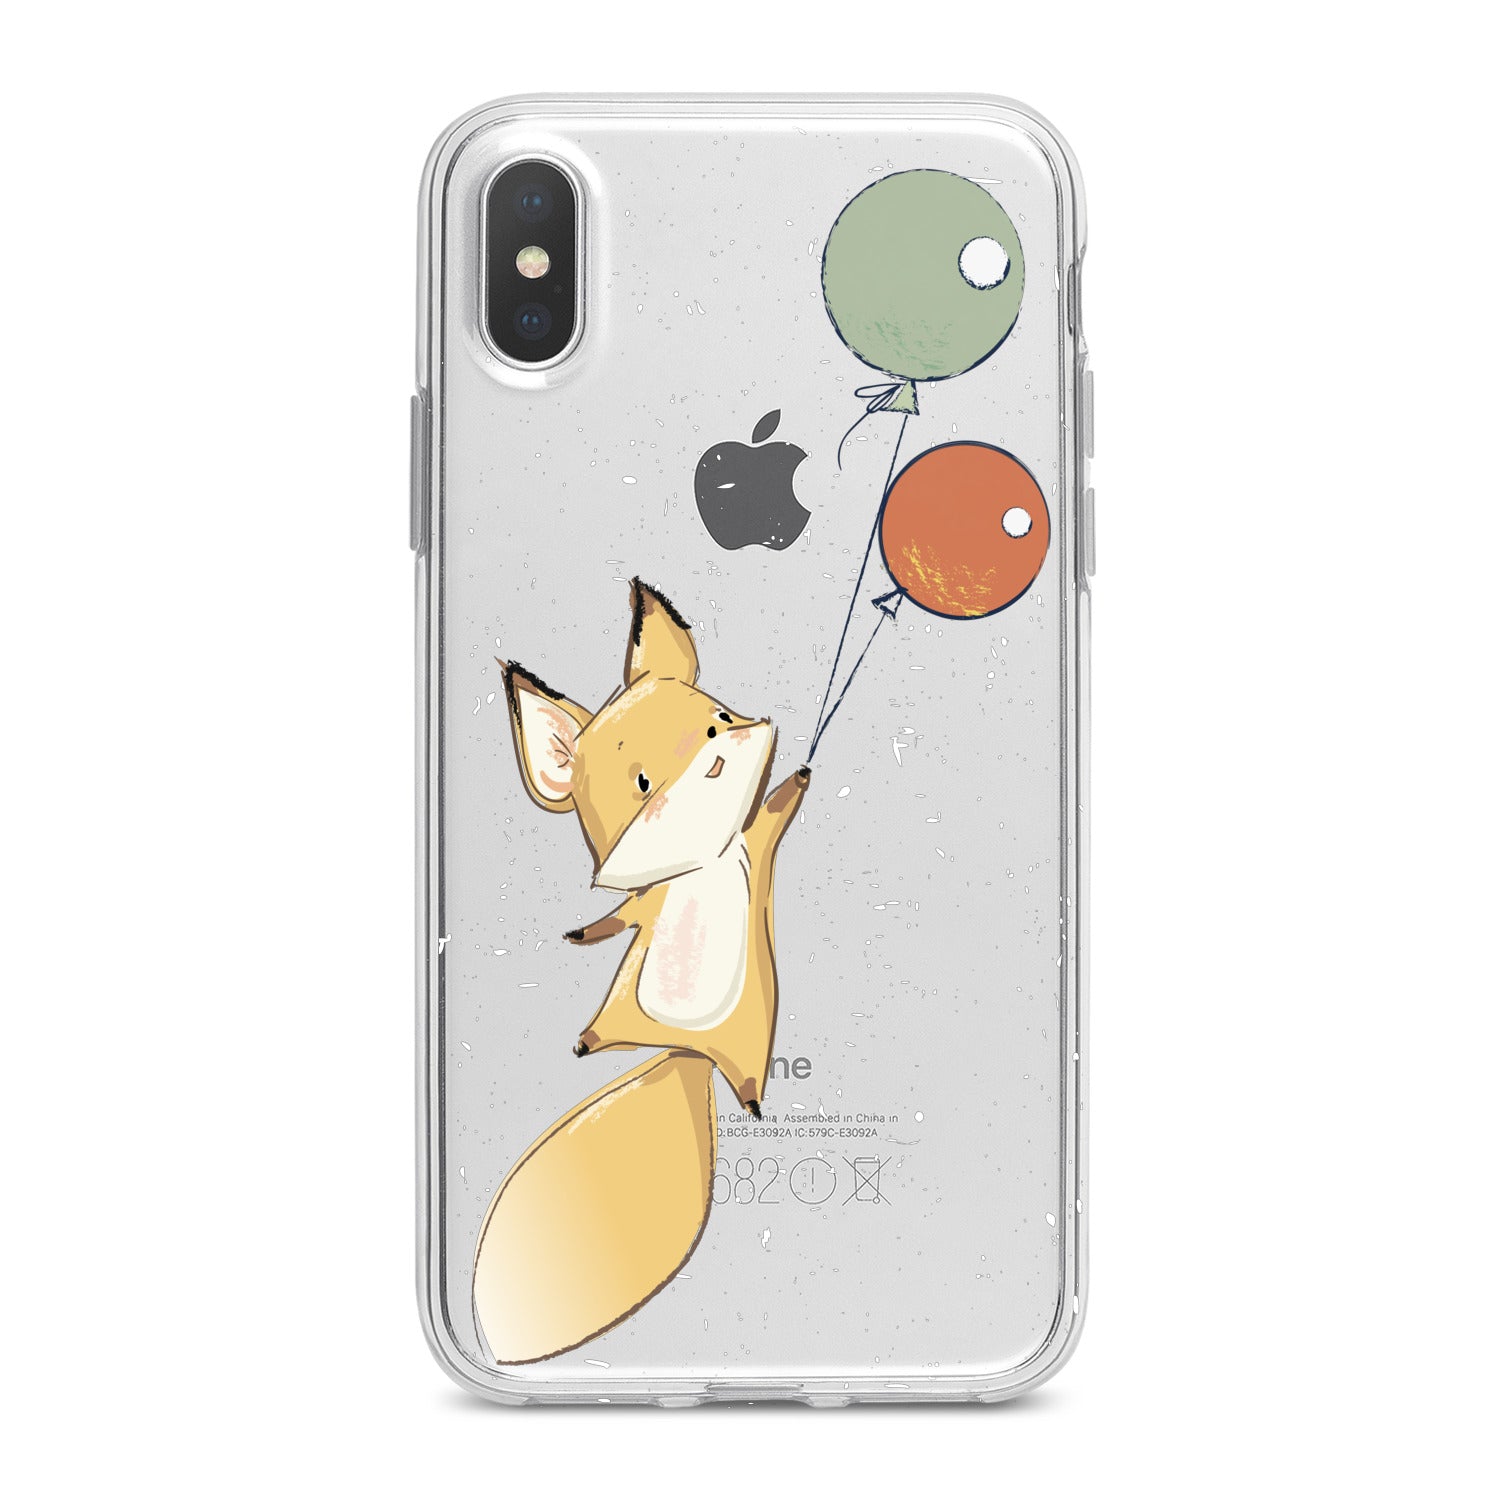 Lex Altern Cute Fox Phone Case for your iPhone & Android phone.